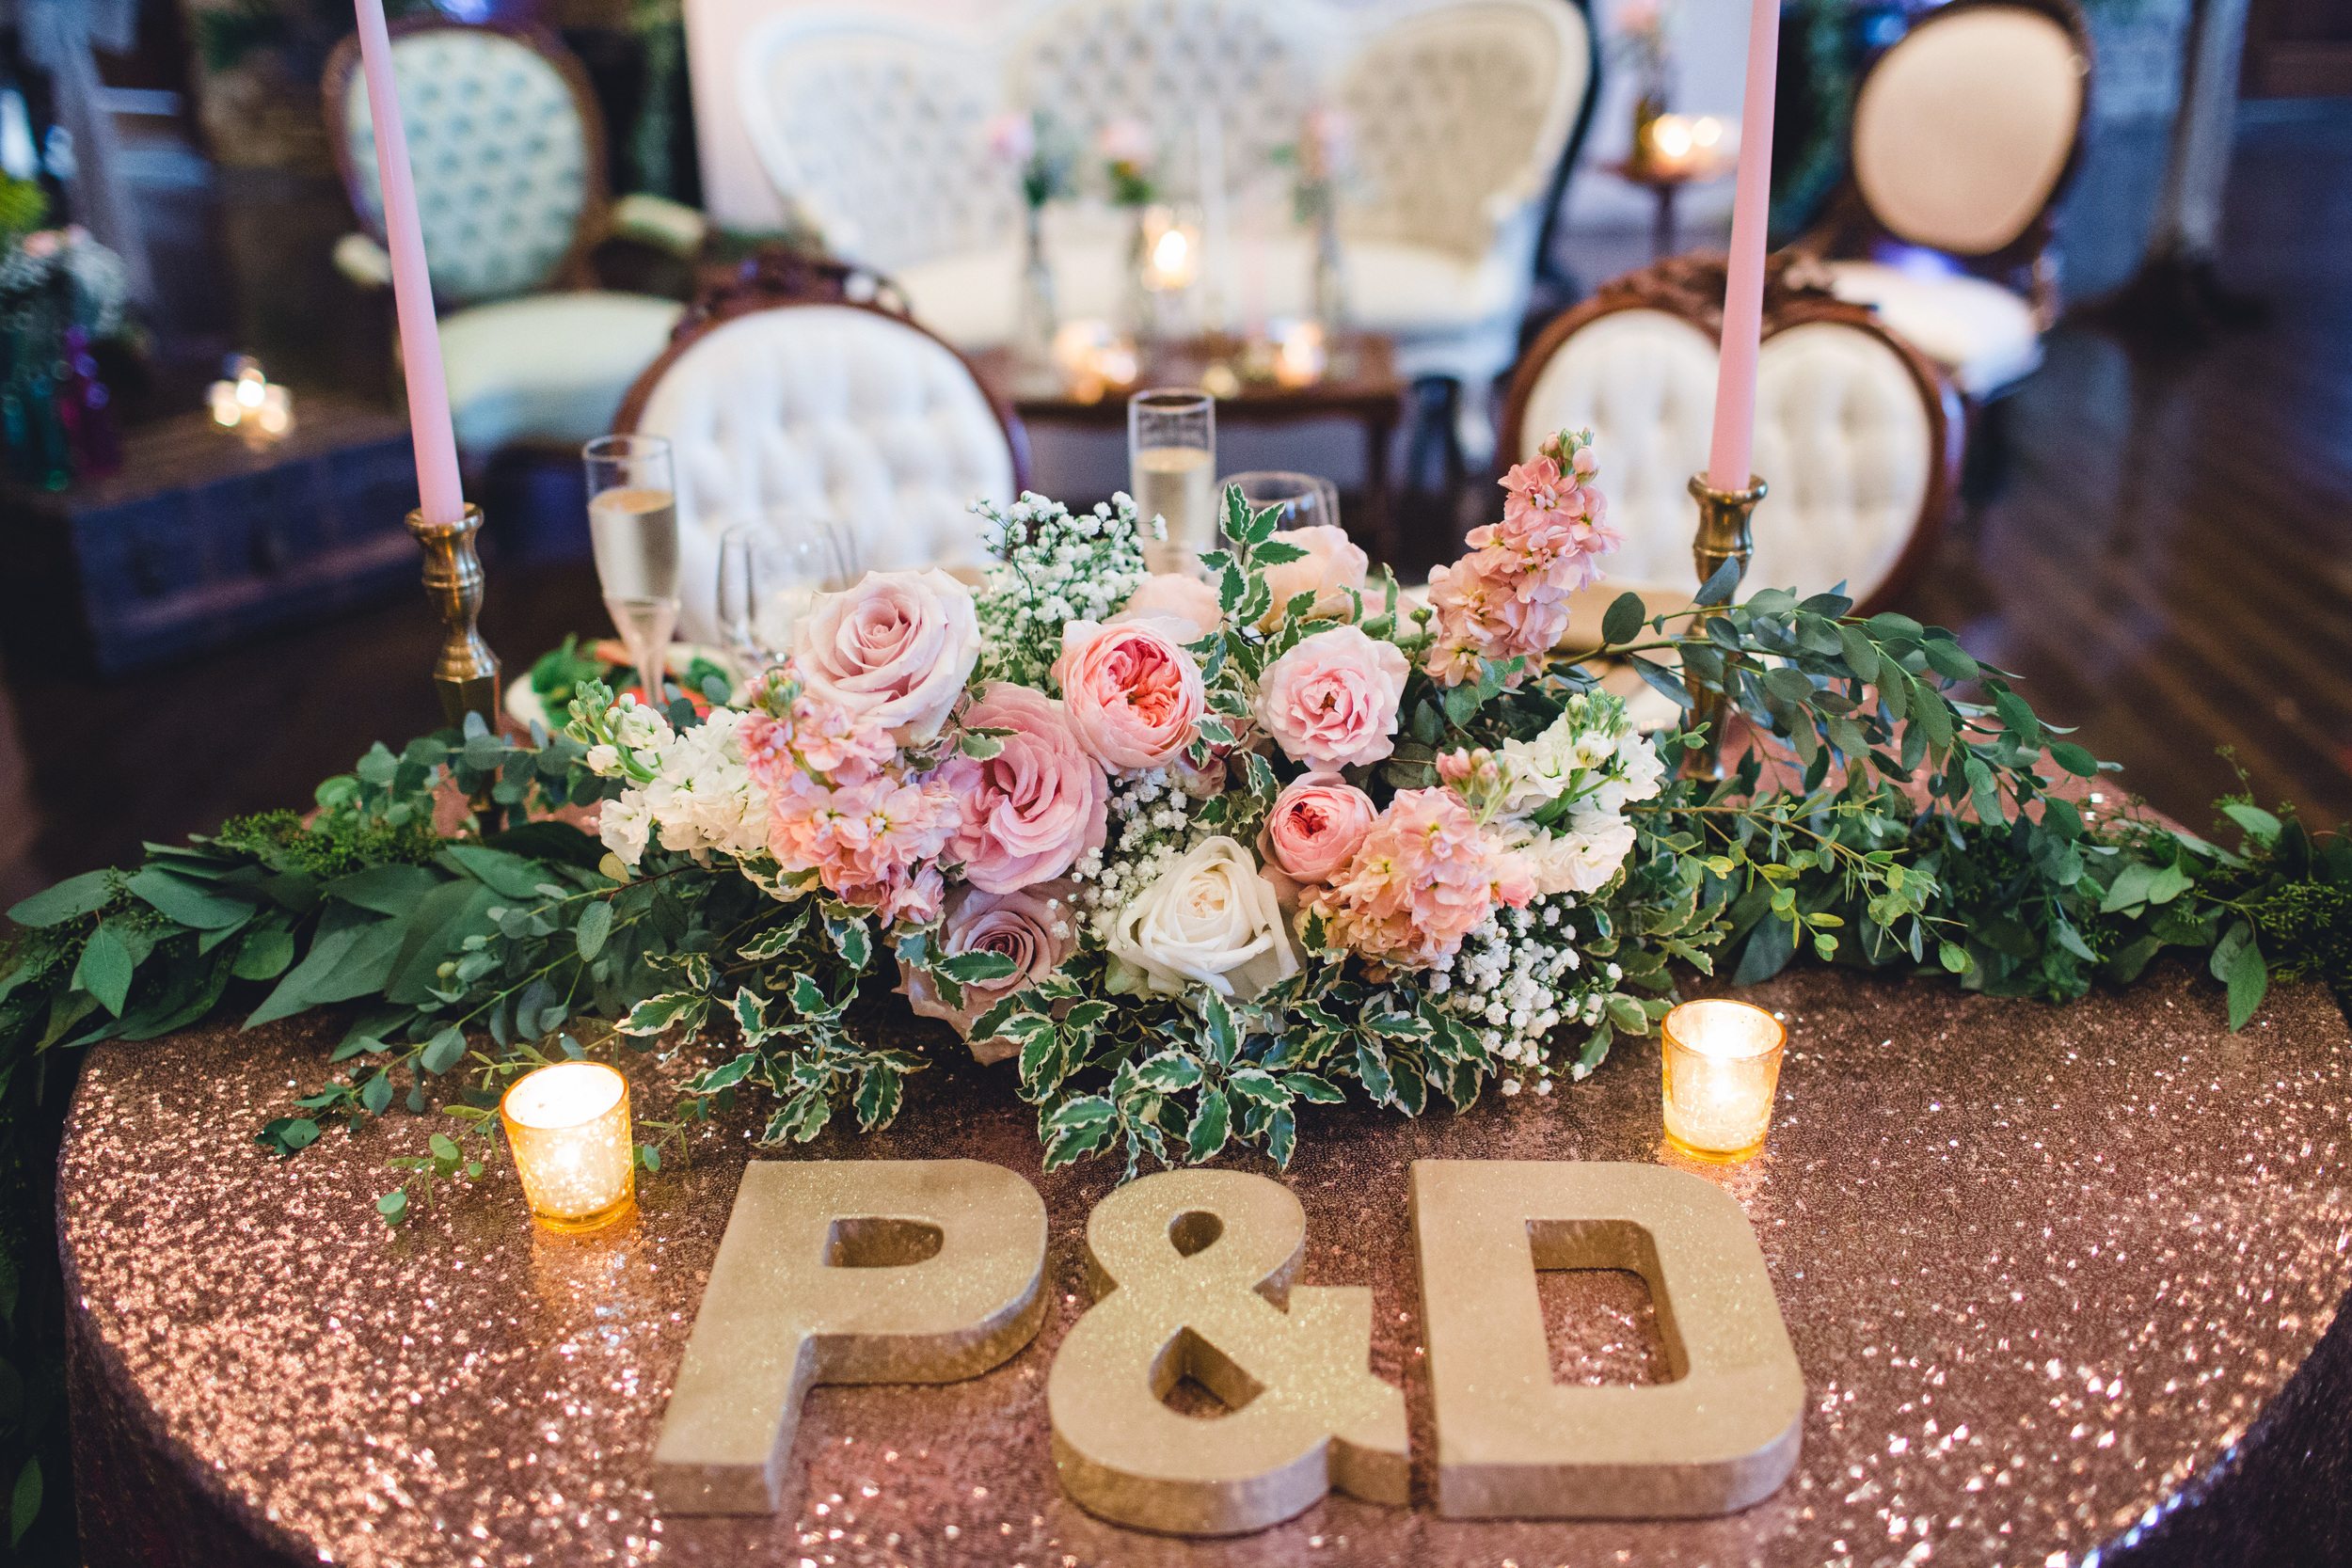 daniela-and-pedro-wedding-izzy-hudgins-photography-a-to-zinnias-whitfield-square-charles-h-morris-center-wedding-ivoyy-and-beau-bridal-boutique-dorie-hayley-paige-savannah-wedding-planner-savannah-bridal-boutique-savannah-weddings-45.jpg